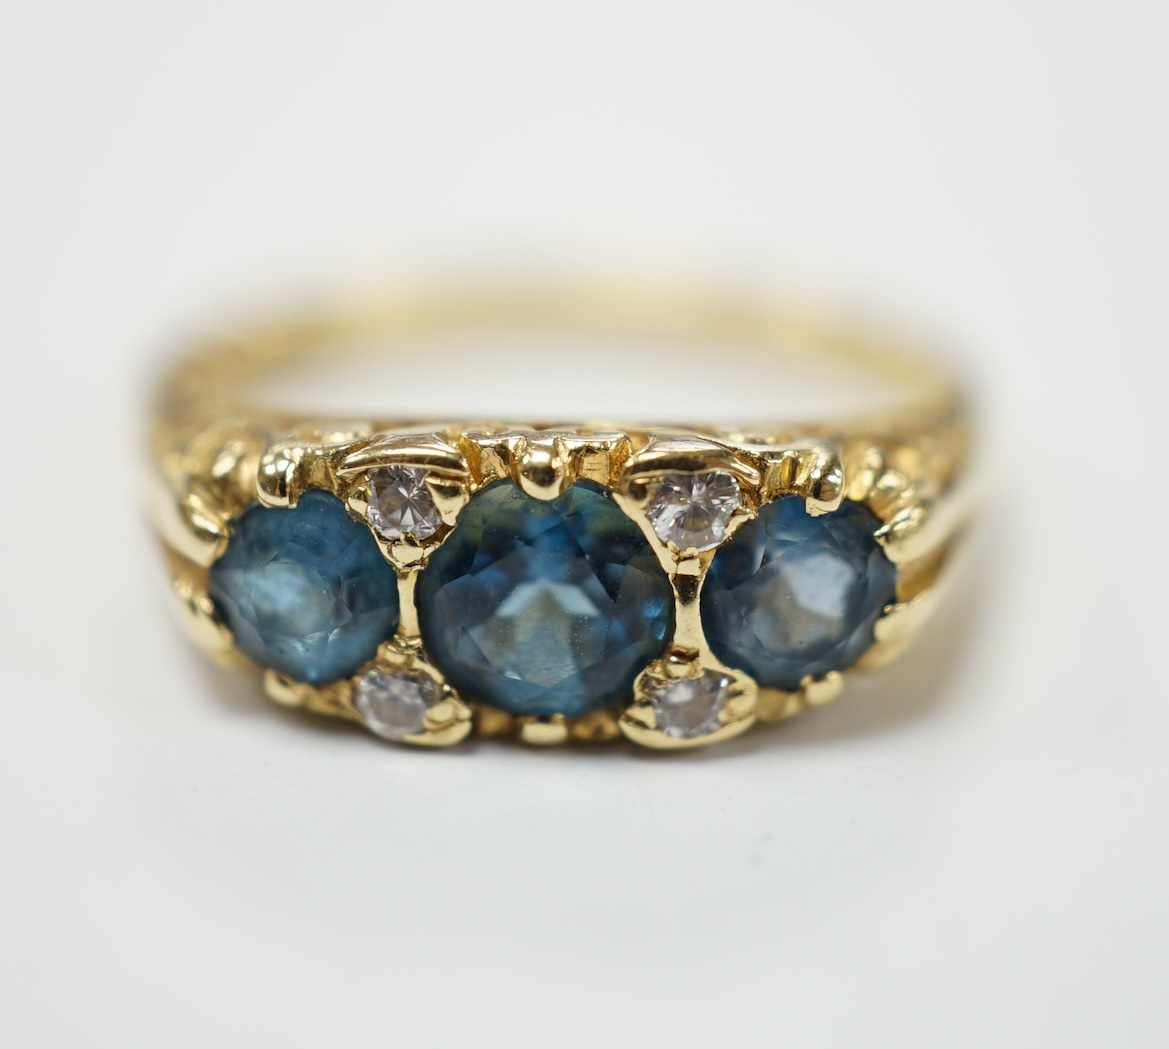 A modern Edwardian style 18ct gold and three stone blue topaz set ring, with diamond chip spacers, size M, gross weight 4.1 grams. Fair condition.